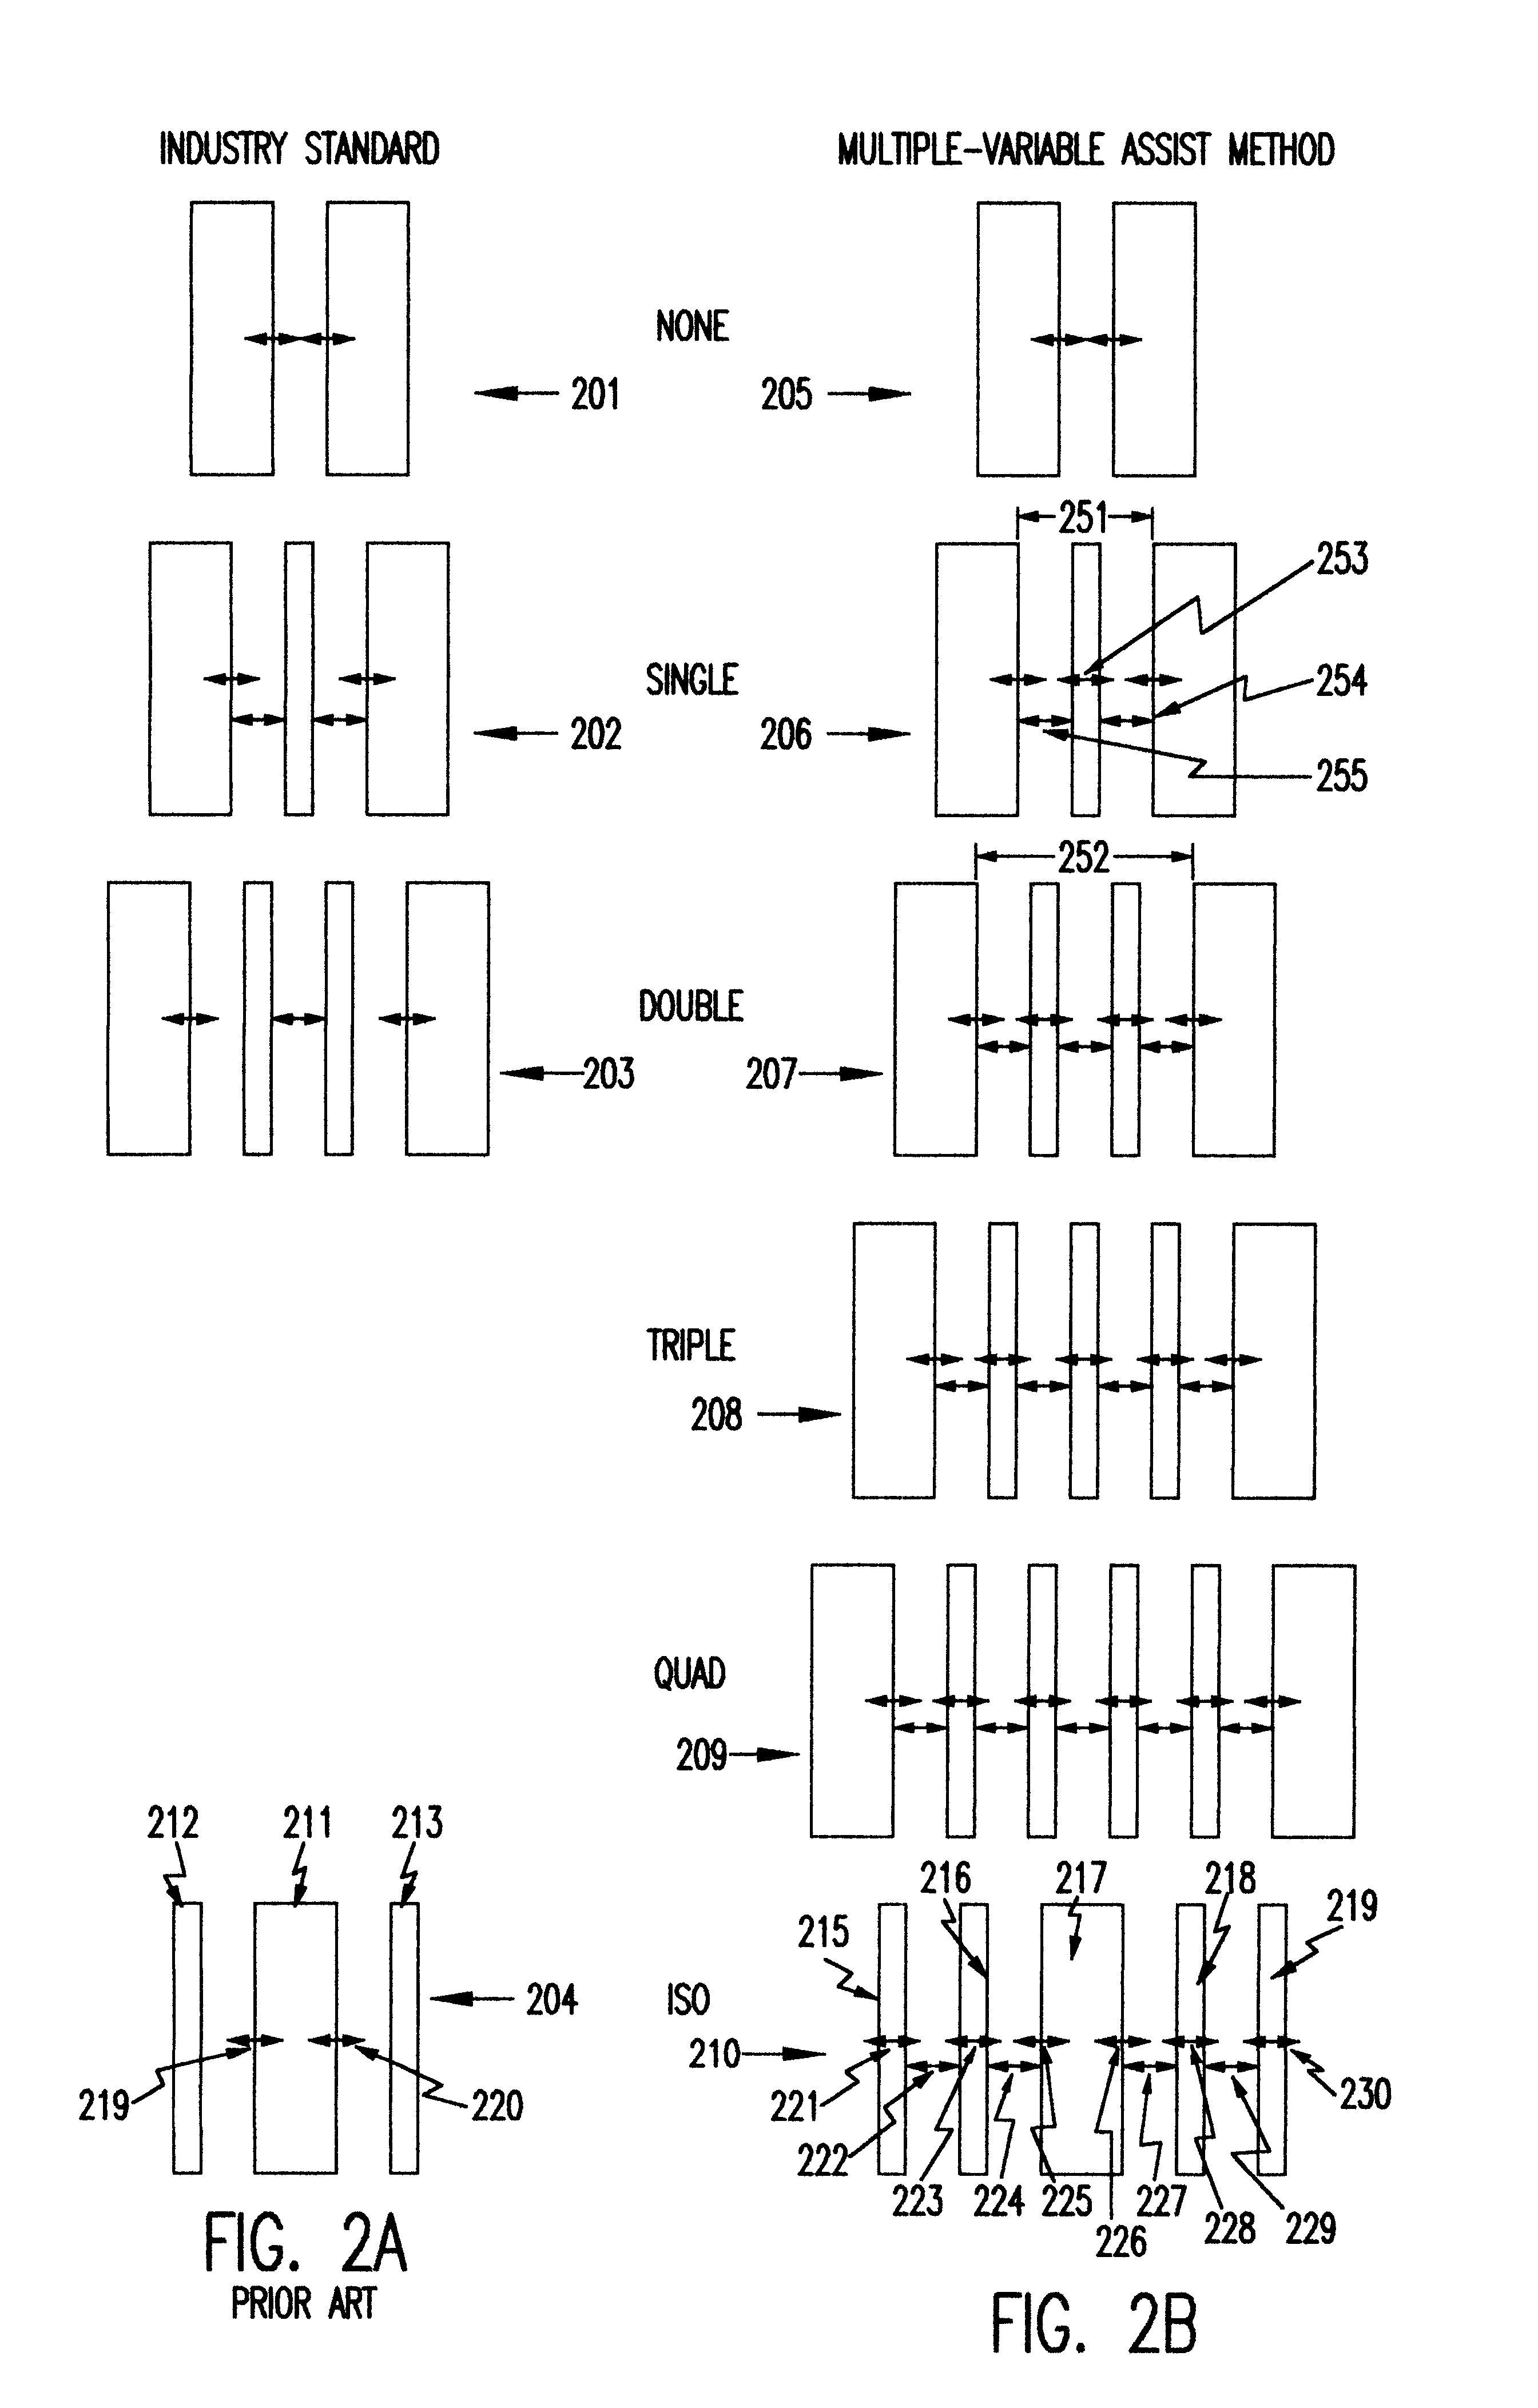 Method to determine optical proximity correction and assist feature rules which account for variations in mask dimensions